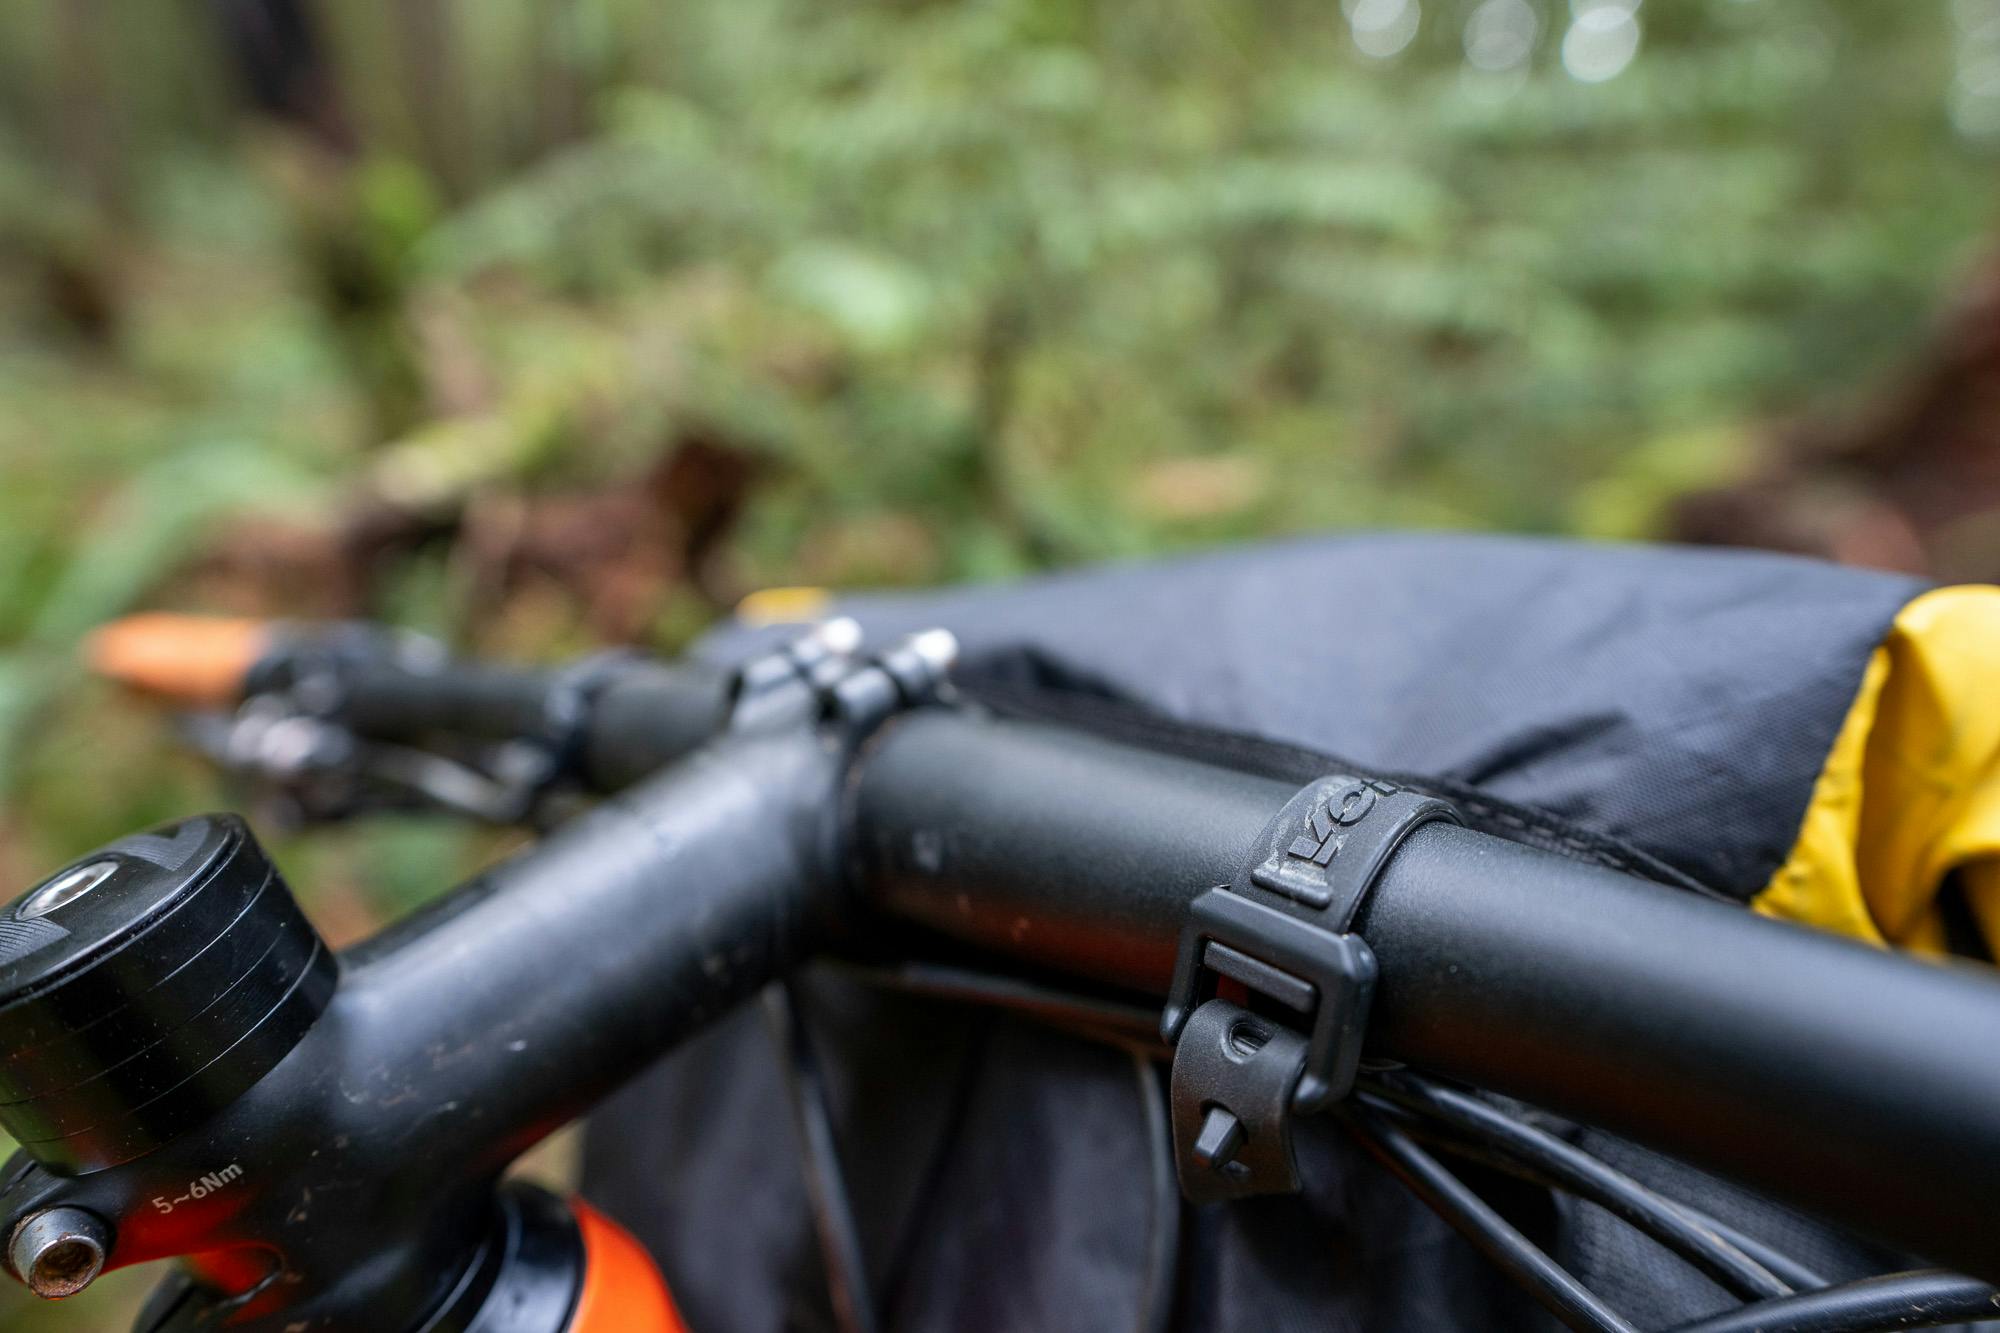 The bags attachments to the handlebars.